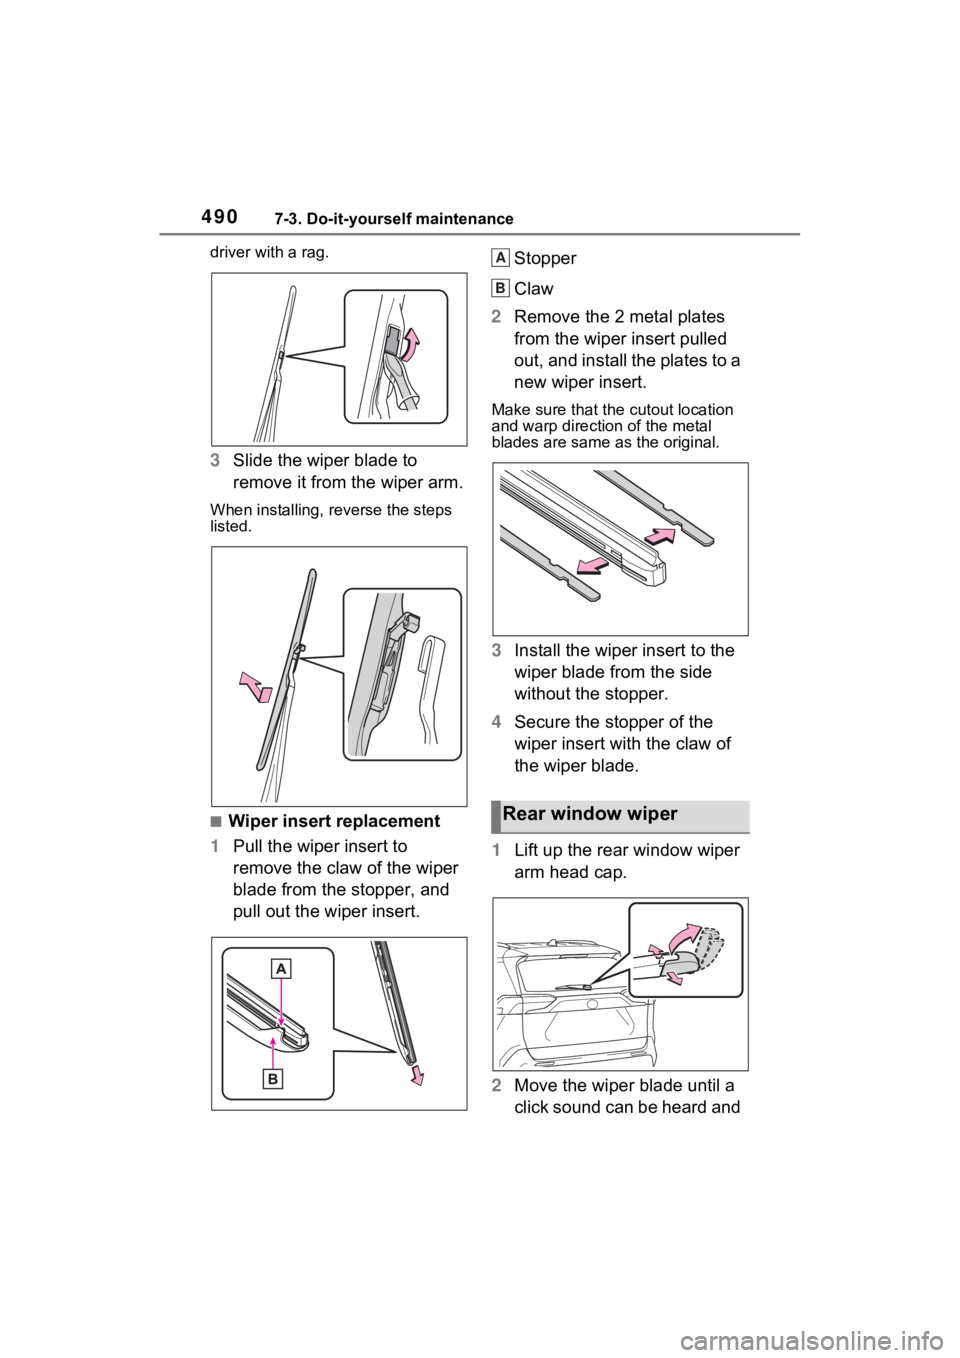 TOYOTA RAV4 PRIME 2021  Owners Manual 4907-3. Do-it-yourself maintenance
driver with a rag.
3Slide the wiper blade to 
remove it from the wiper arm.
When installing, rev erse the steps 
listed.
■Wiper insert replacement
1 Pull the wiper